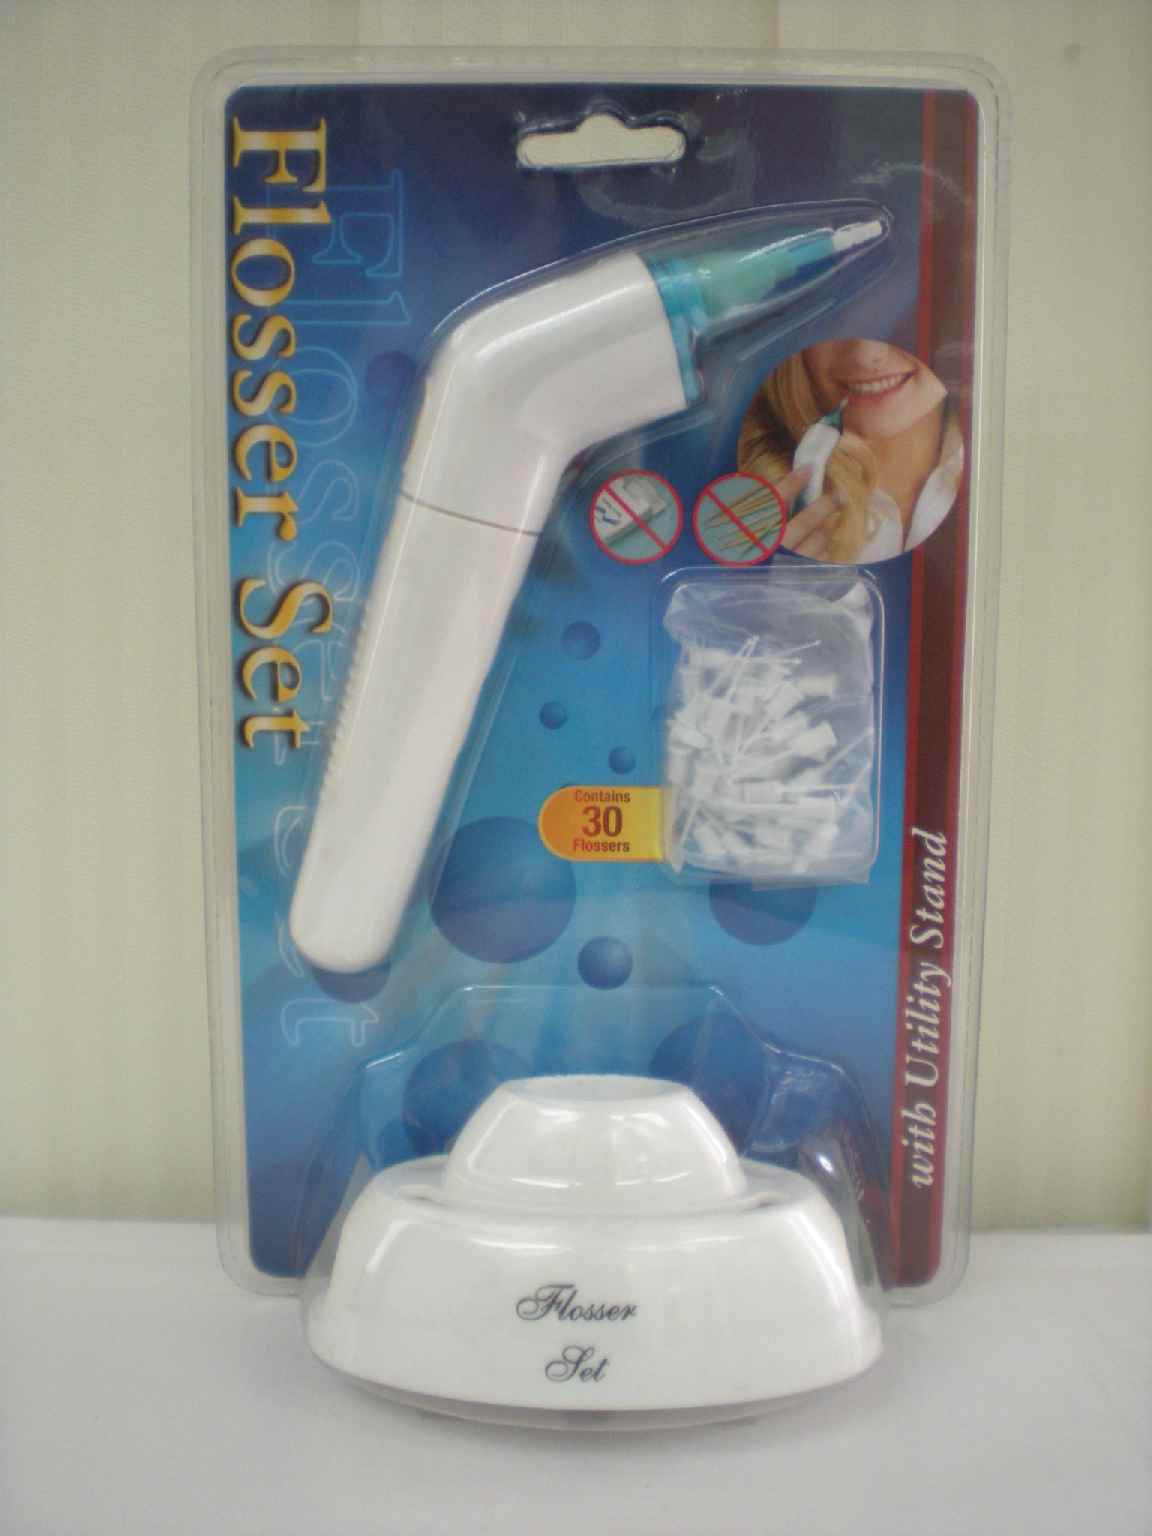 K3926 FLOSSER SET WITH UTILITY STAND